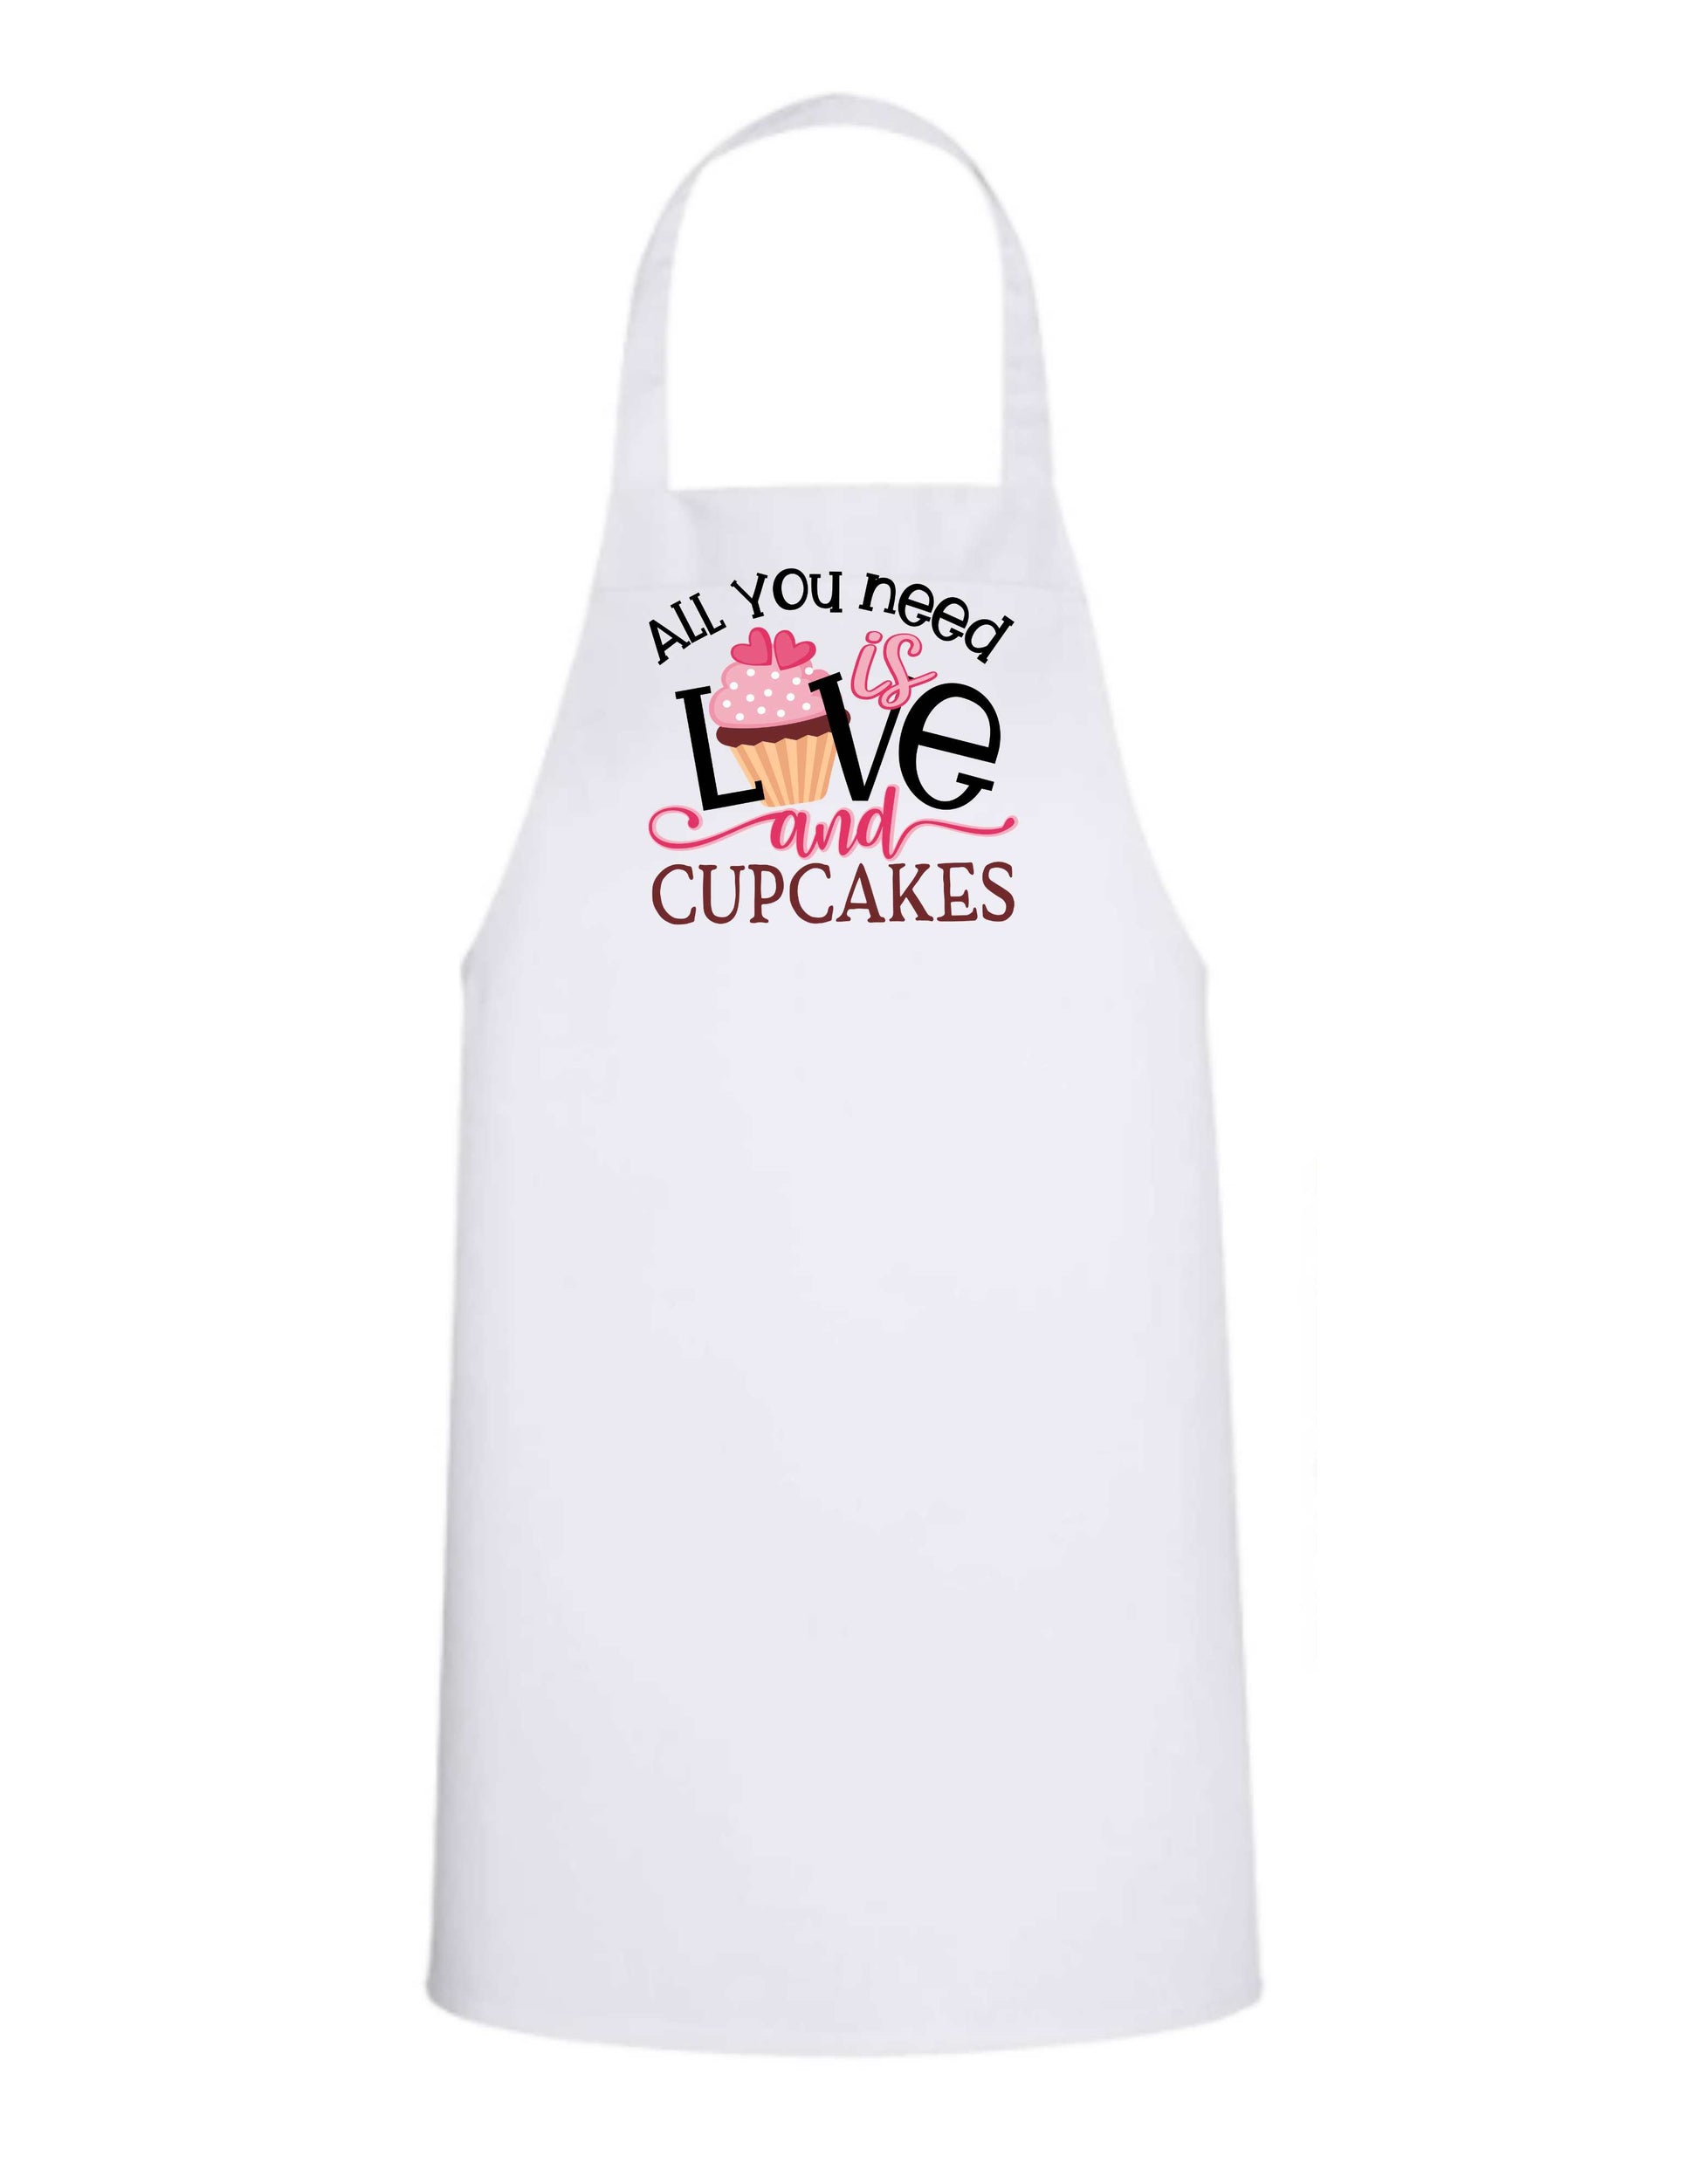 All You Need is Love and Cupcakes - White Apron with Color design Great Gift - Mister Snarky's